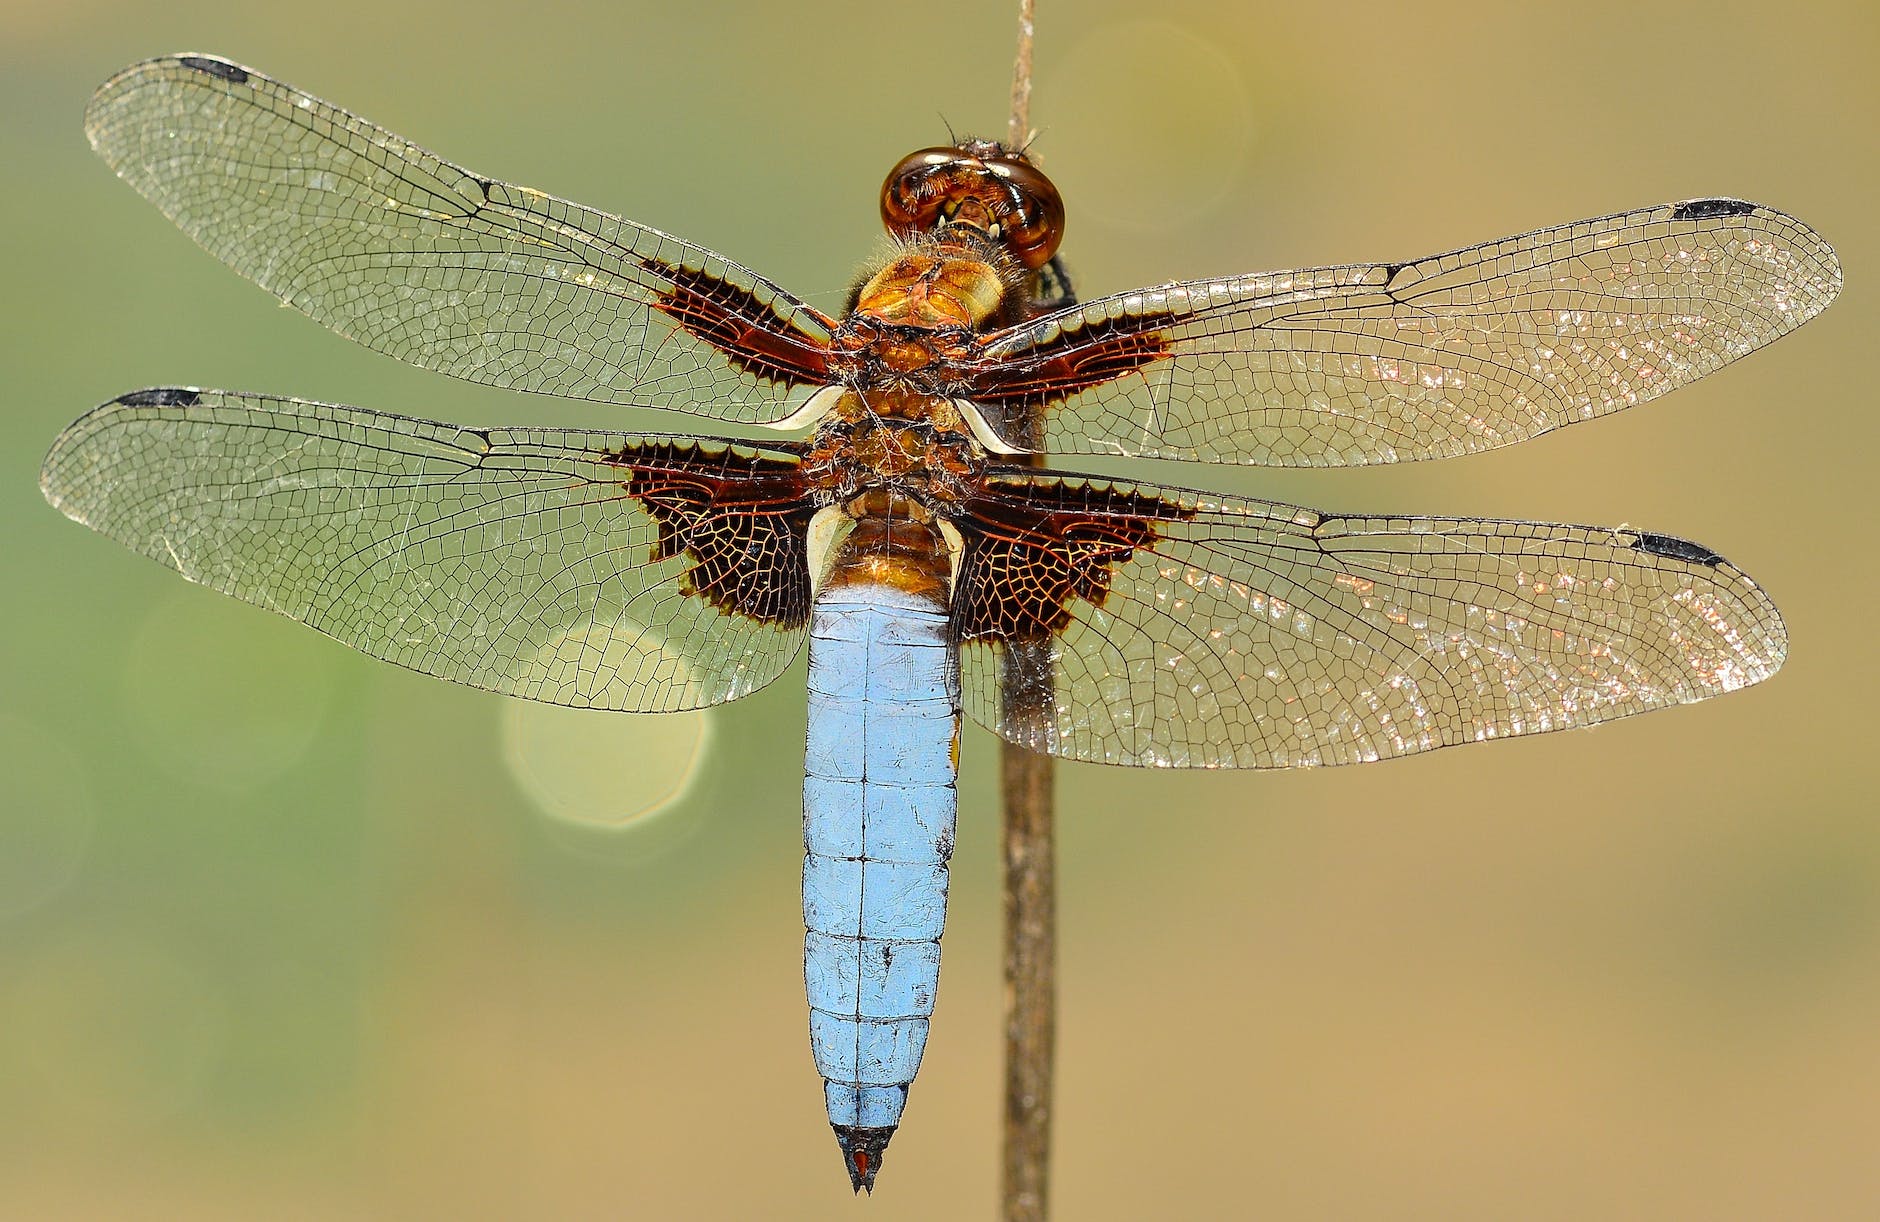 Large dragonfly with 4 clear wings and bright blue green abdomen resting on a vertical twig. Large oval shape head 90% covered by compound eyes.